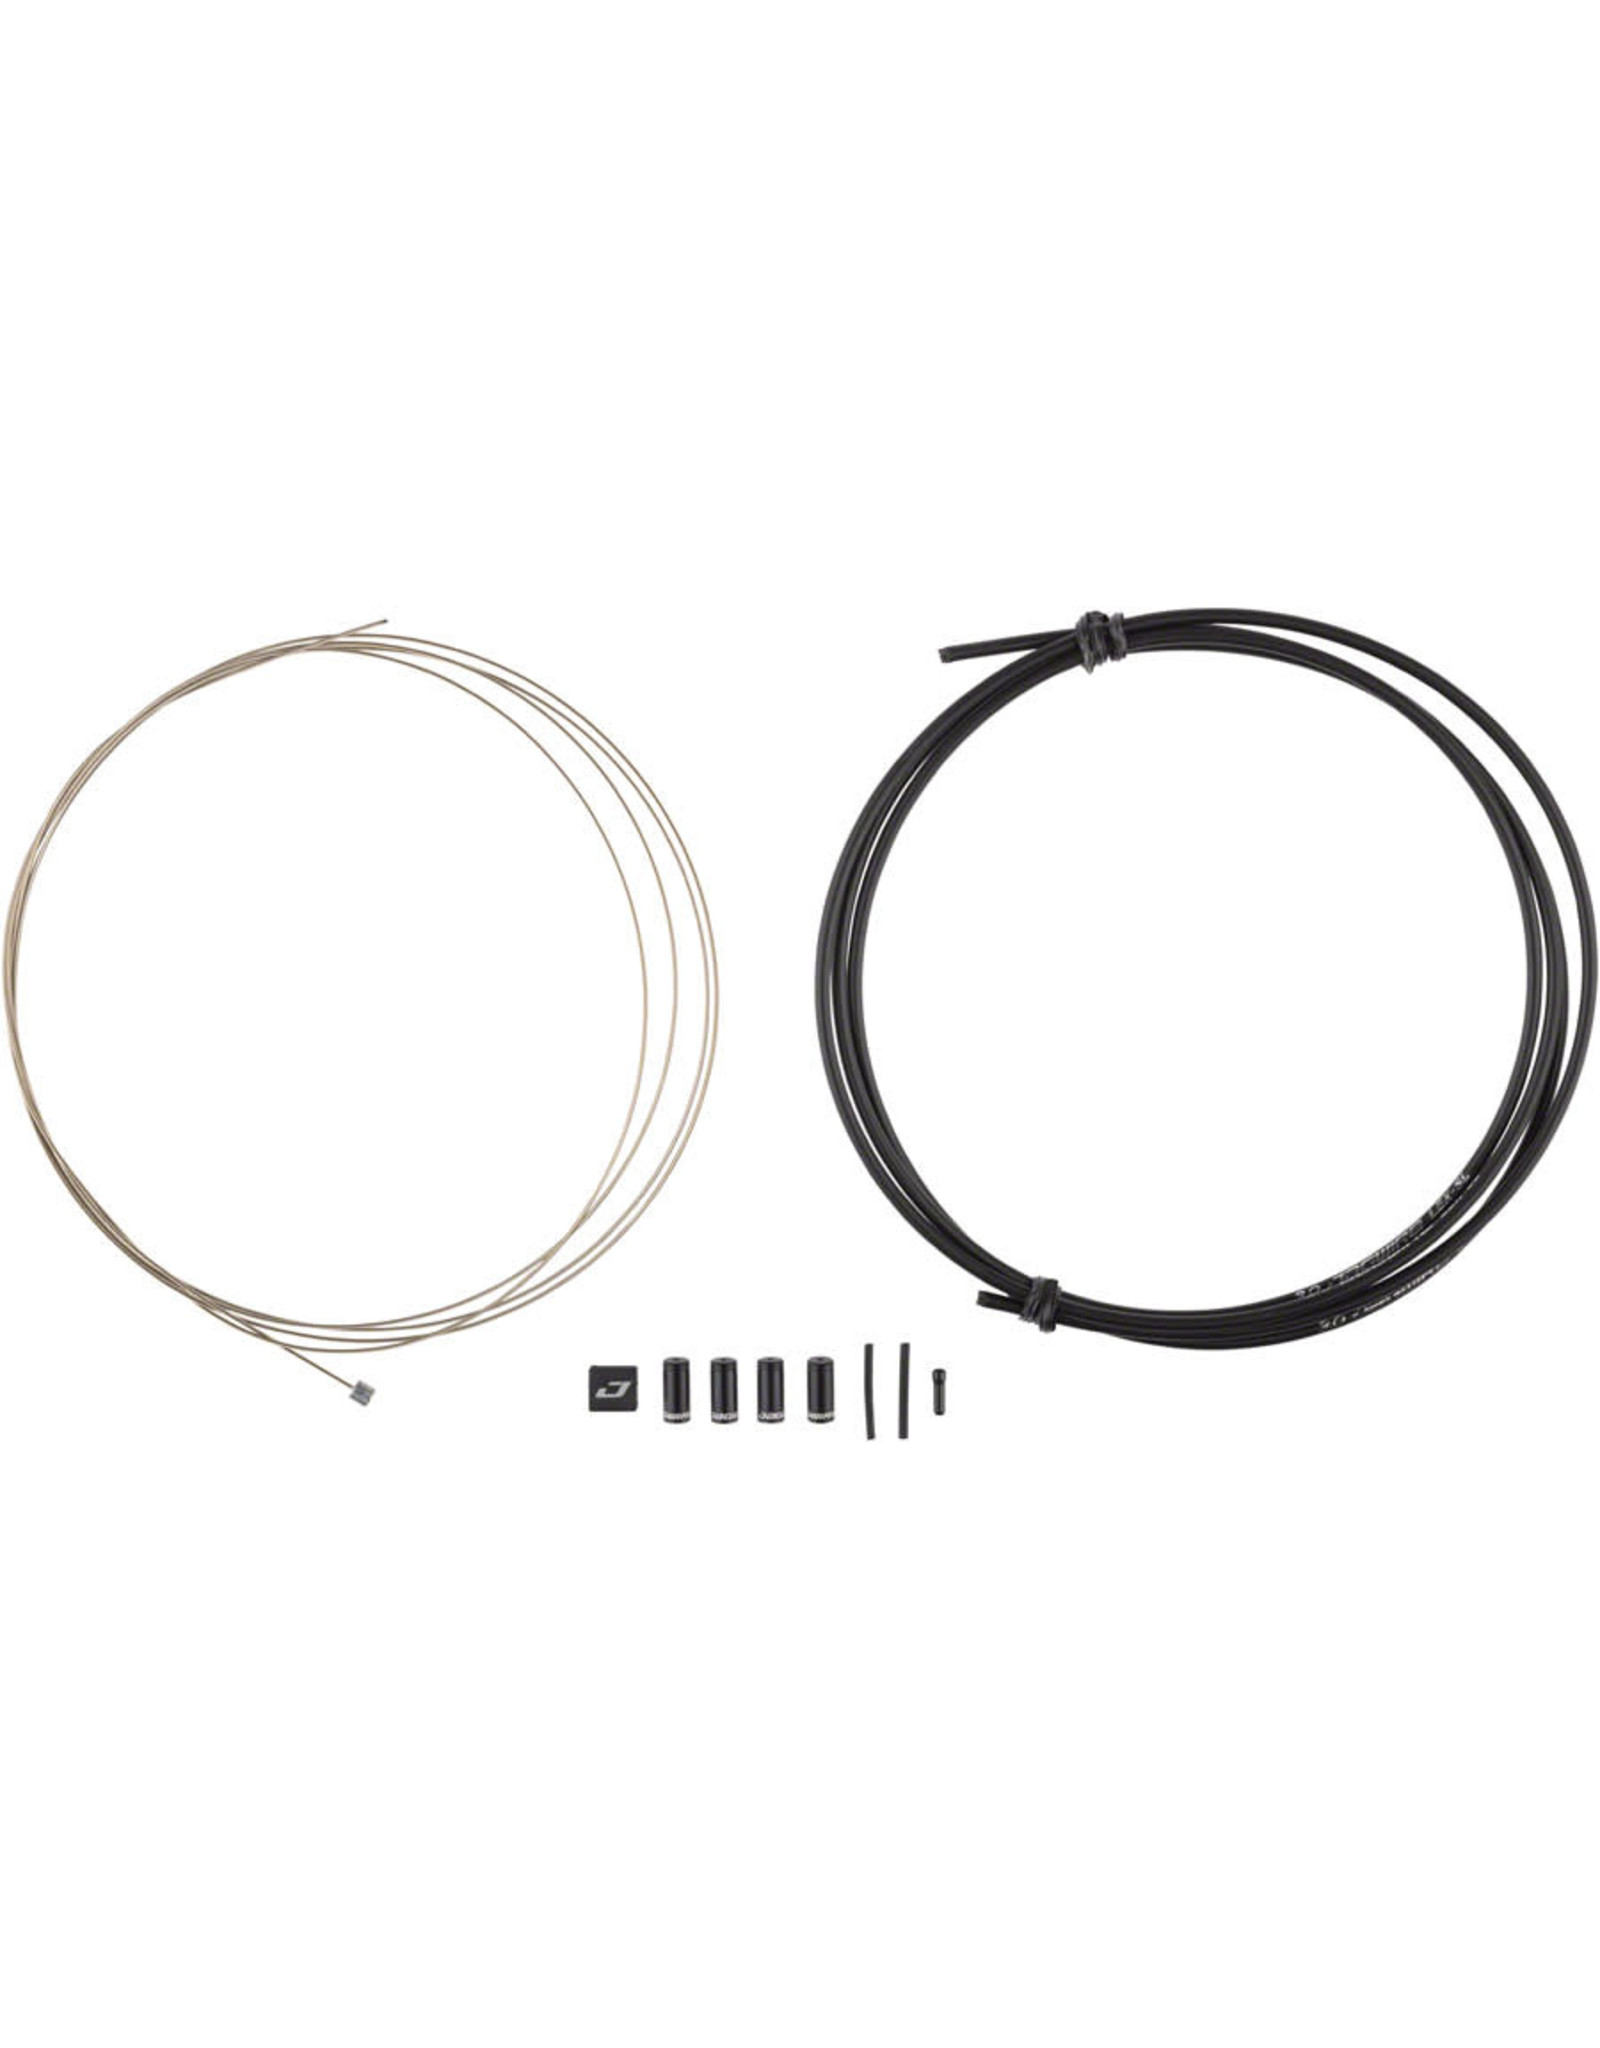 Jagwire C: Jagwire Pro Dropper Cable Kit with 3mm Housing and Polished Cables, Black